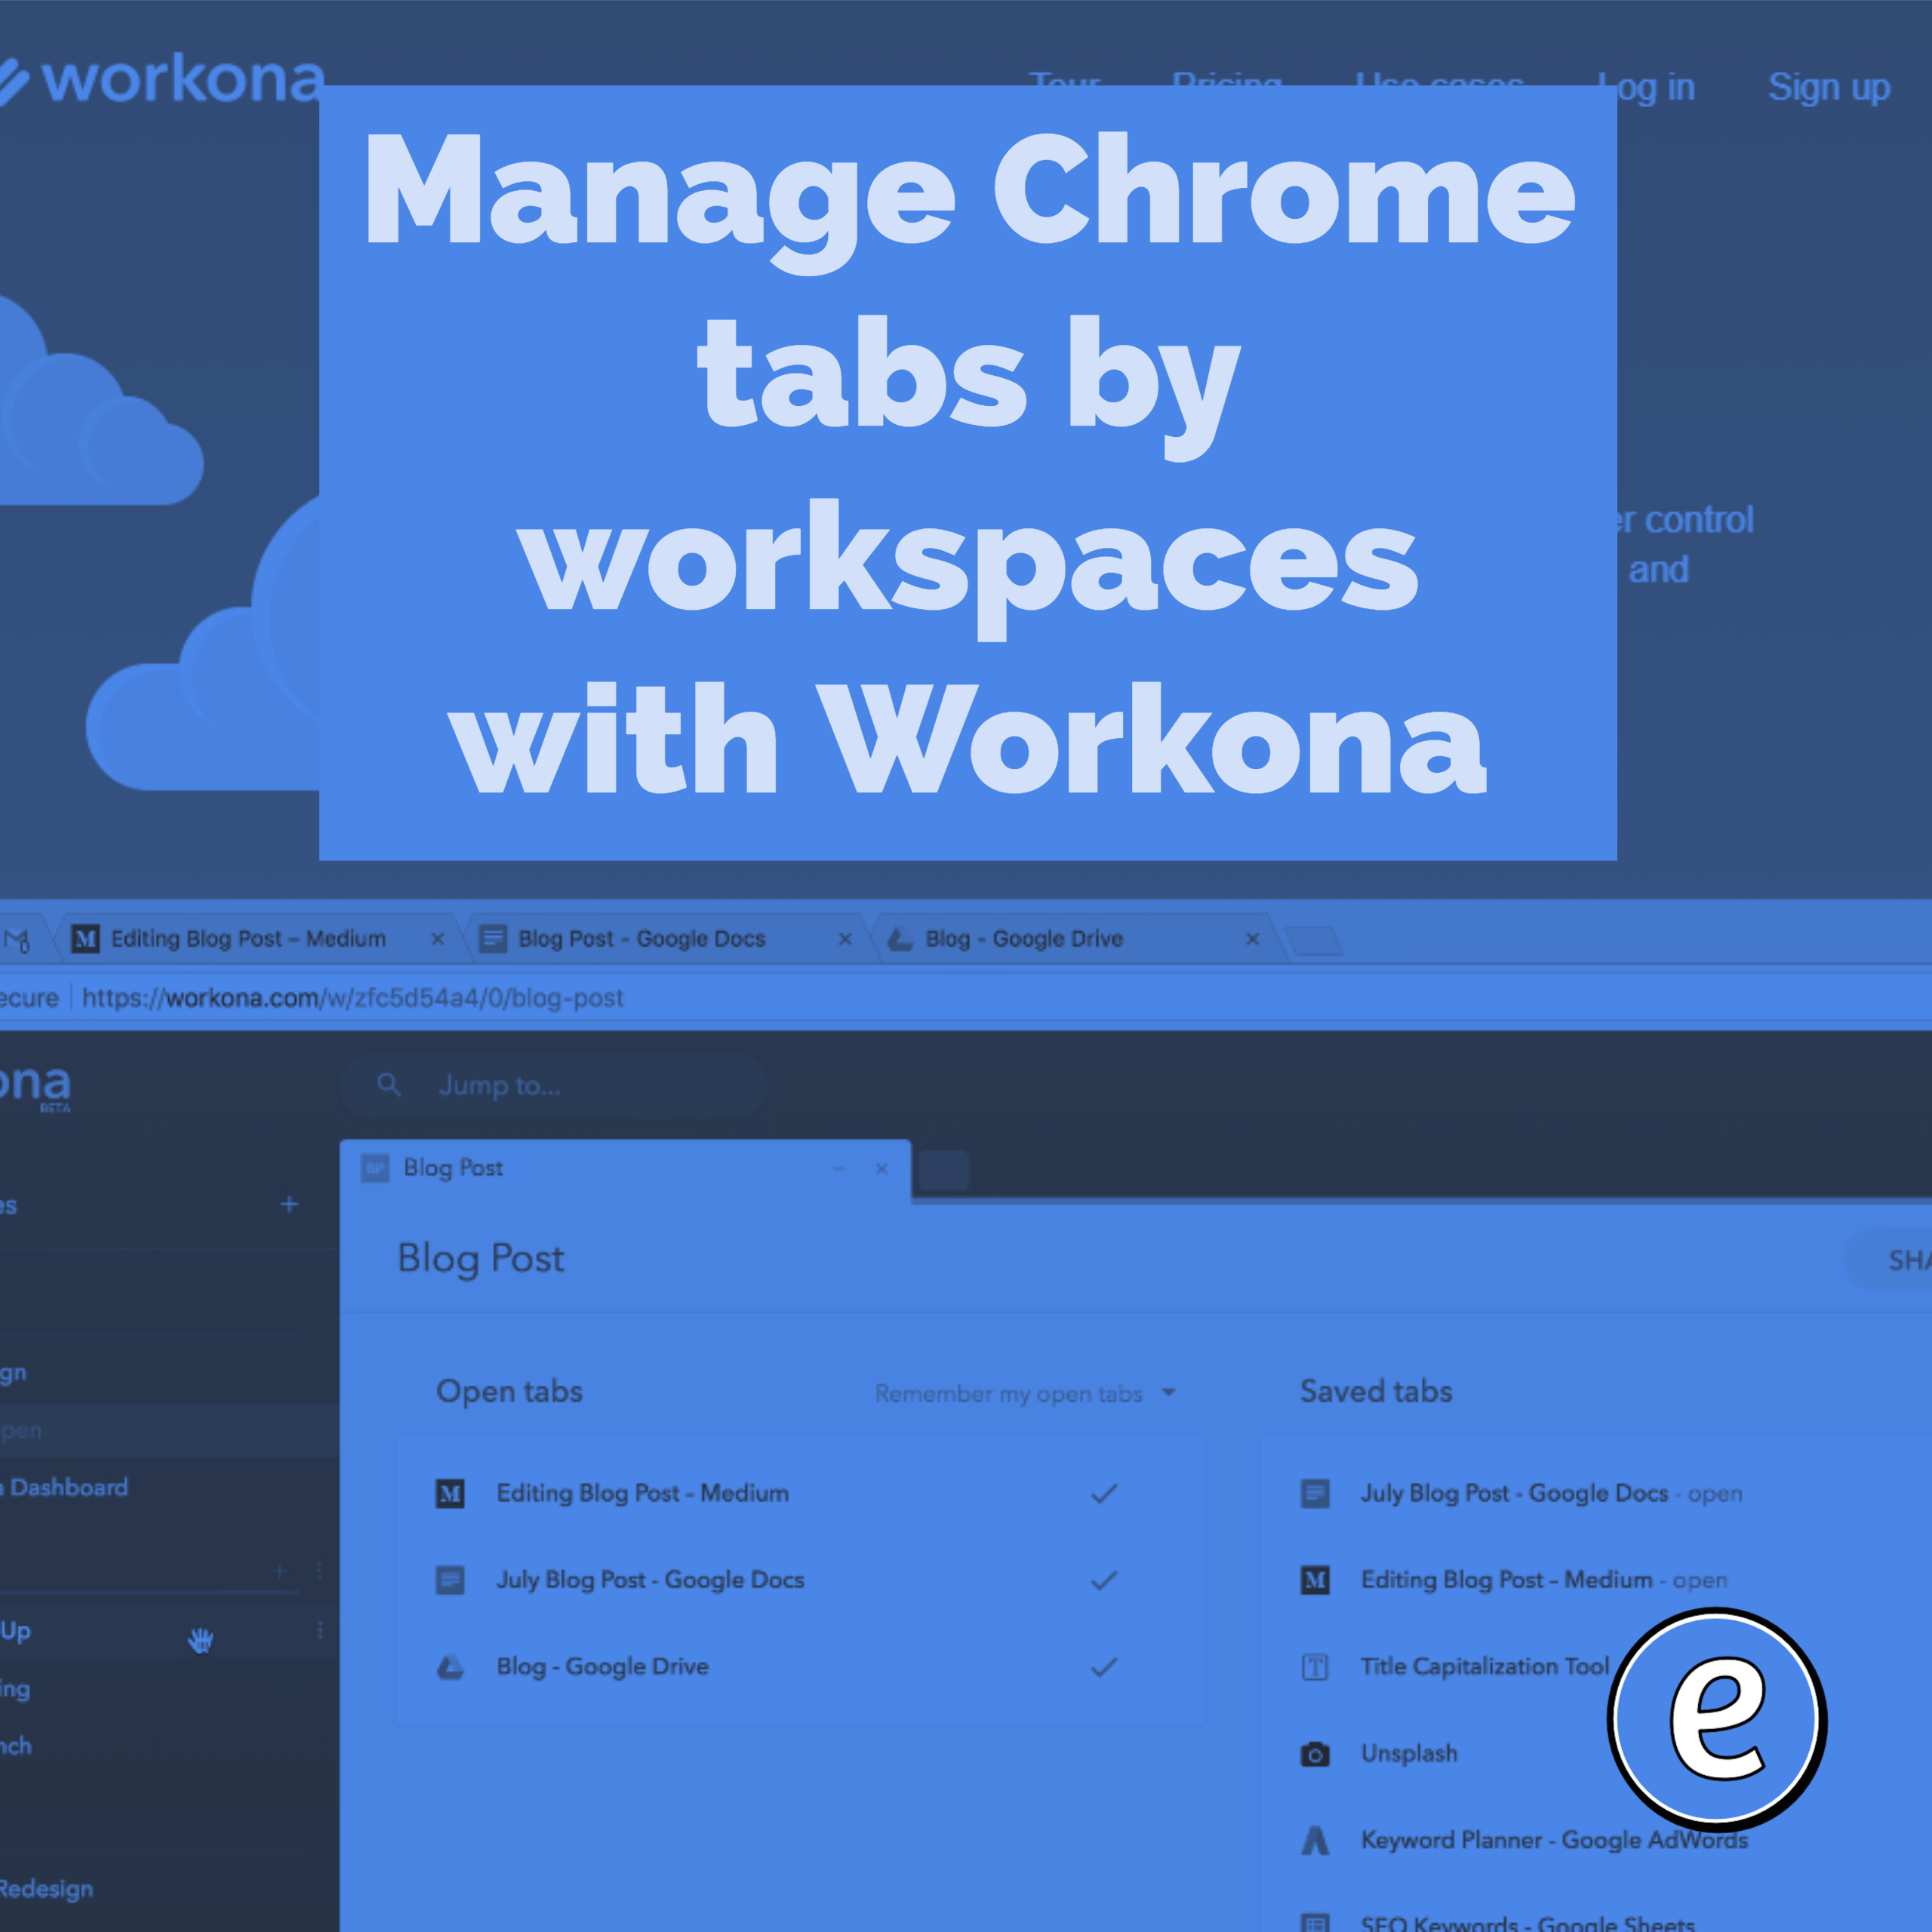 Manage Chrome tabs by workspaces with Workona